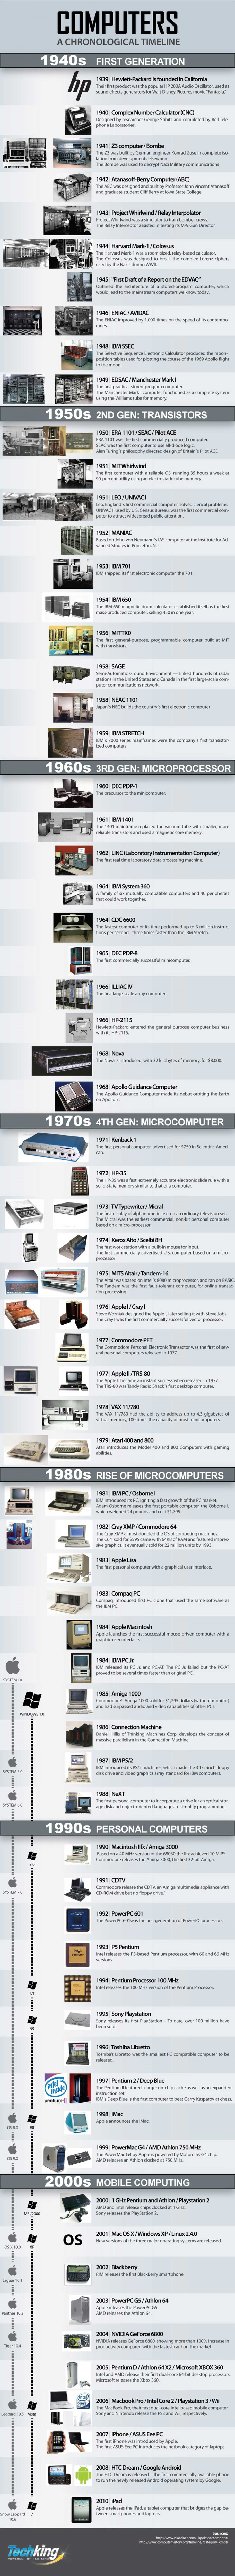 A Comprehensive History of Computers Infographic